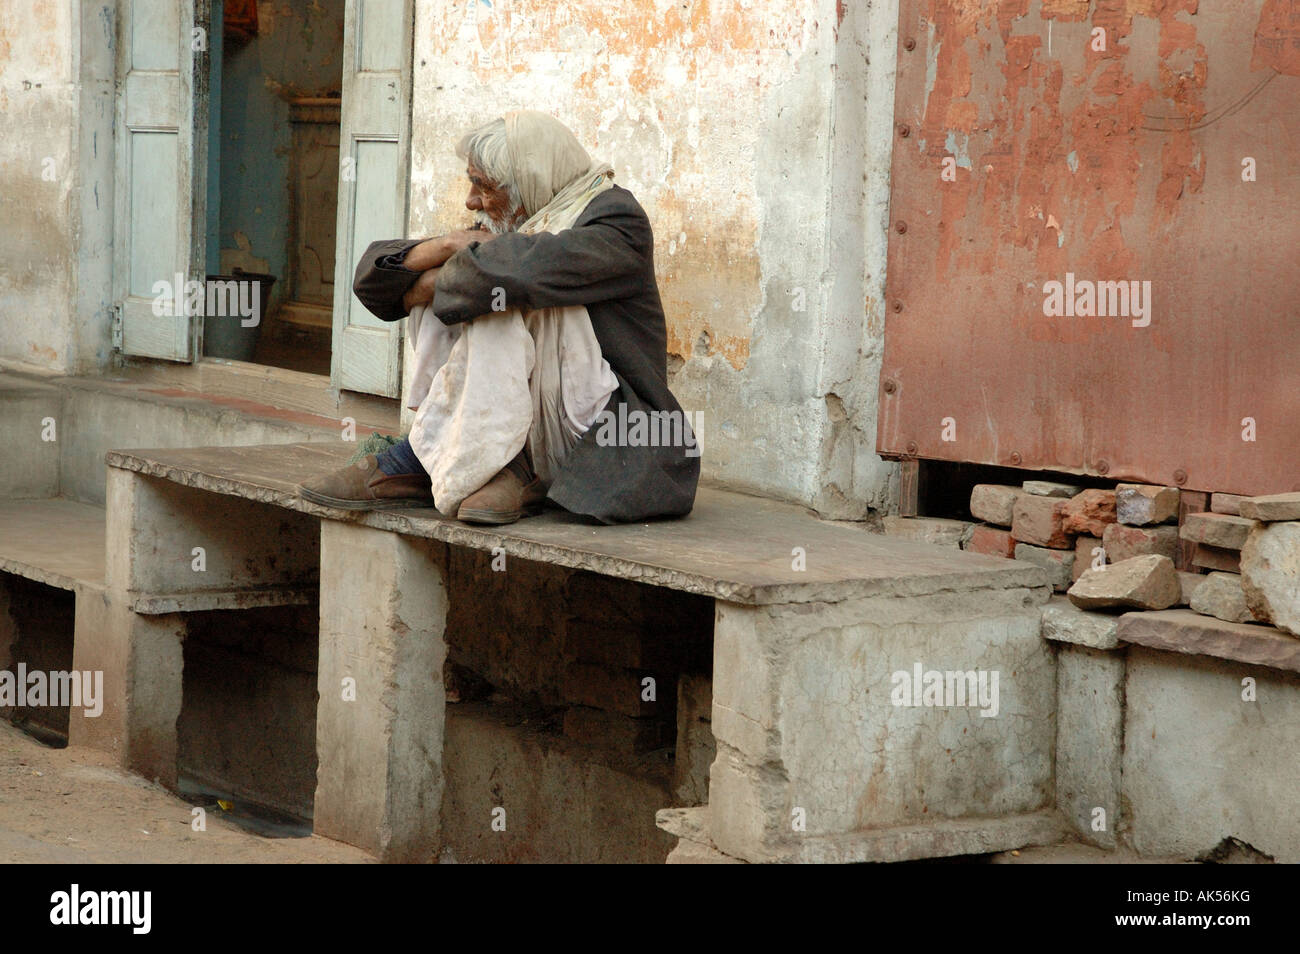 Old Man crouched on a bench in India Stock Photo